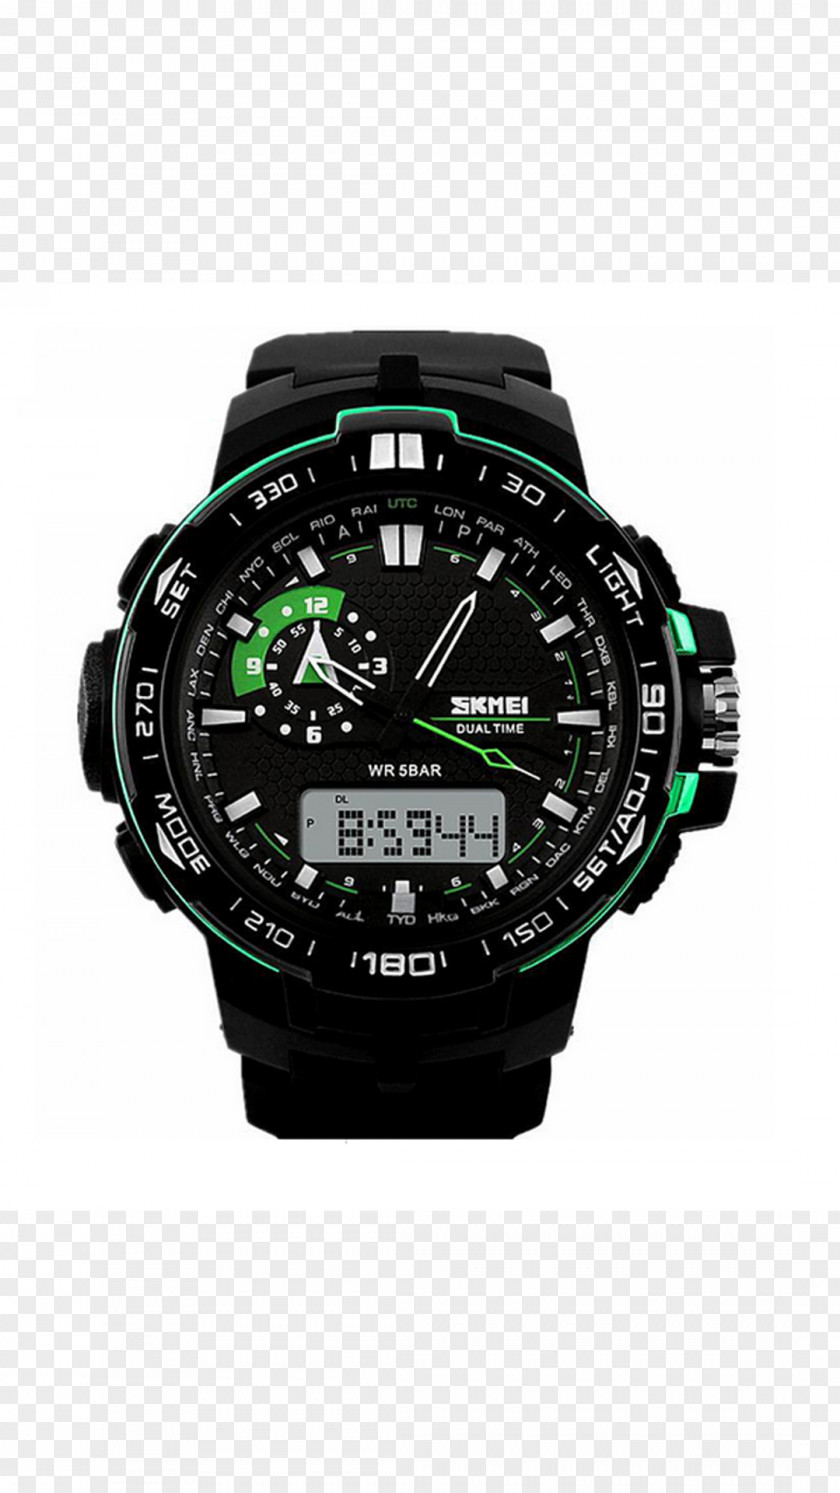 Watch Water Resistant Mark Clock Analog Casio PNG